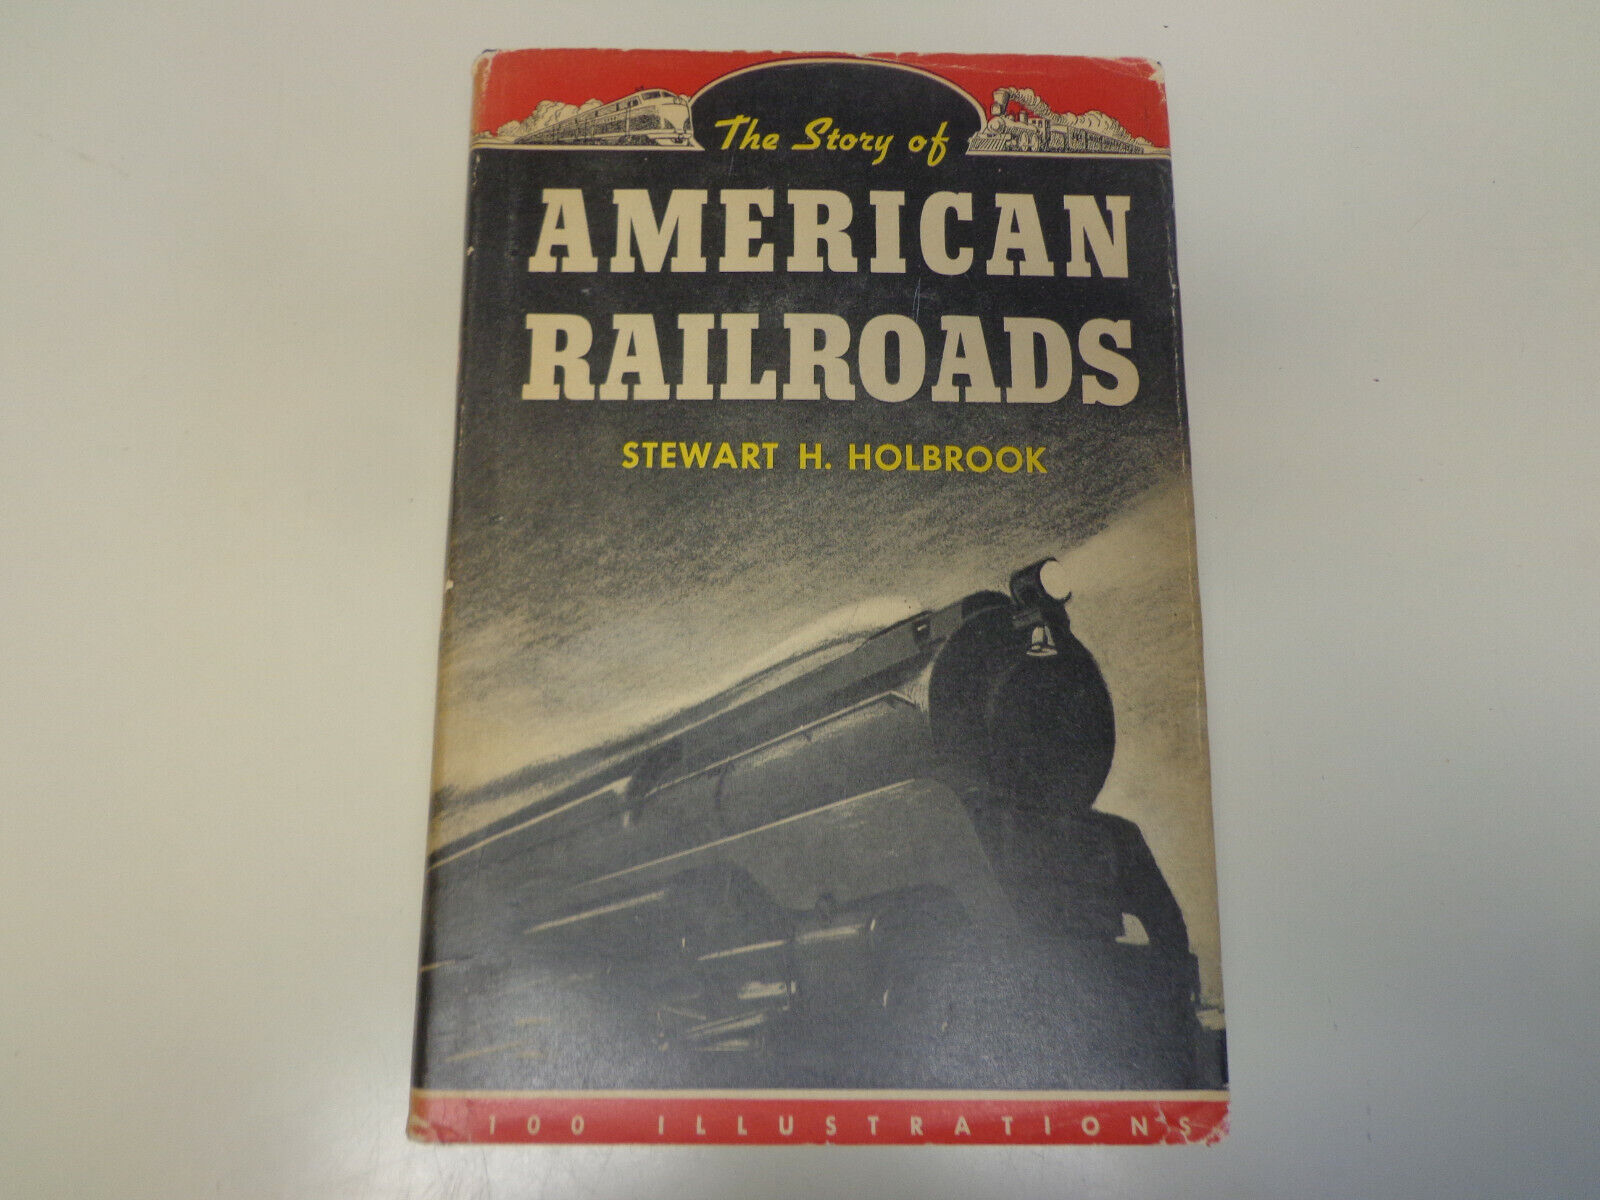 The Story of American Railroads HBDJ 1948 Stewart H Holbrook with Dustjacket